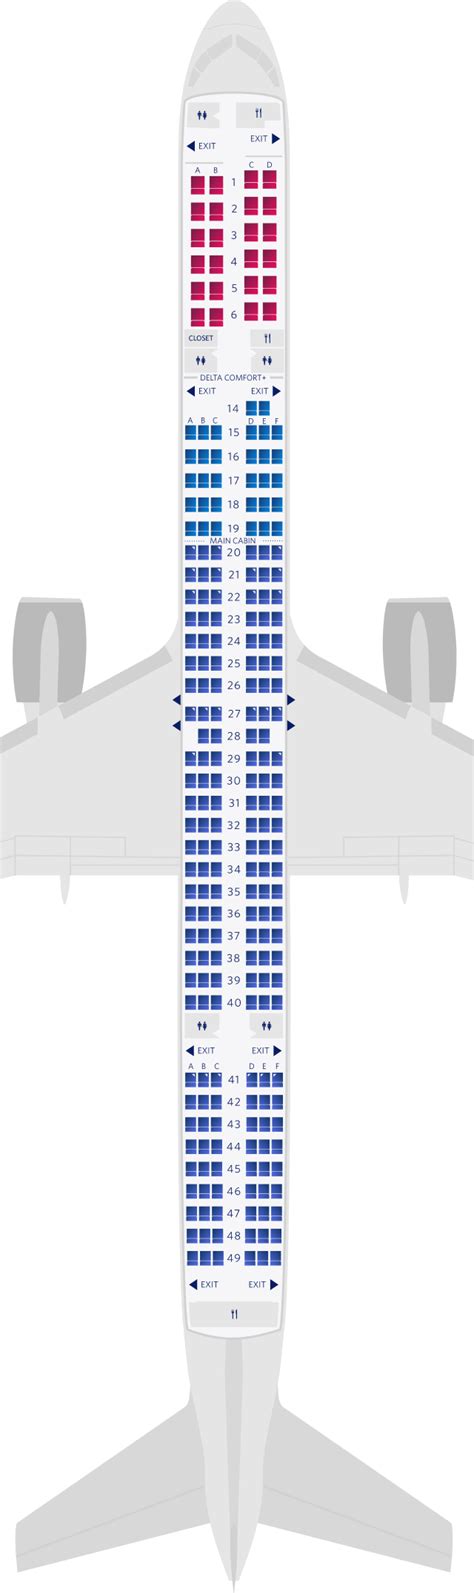 Delta 757 300 seat map. Our Boeing 757-200 aircraft offers a variety of signature products and experiences unlike anything else in the sky. Visit delta.com to learn more. Boeing 757-200 Seat Maps, Specs & Amenities | Delta Air Lines 